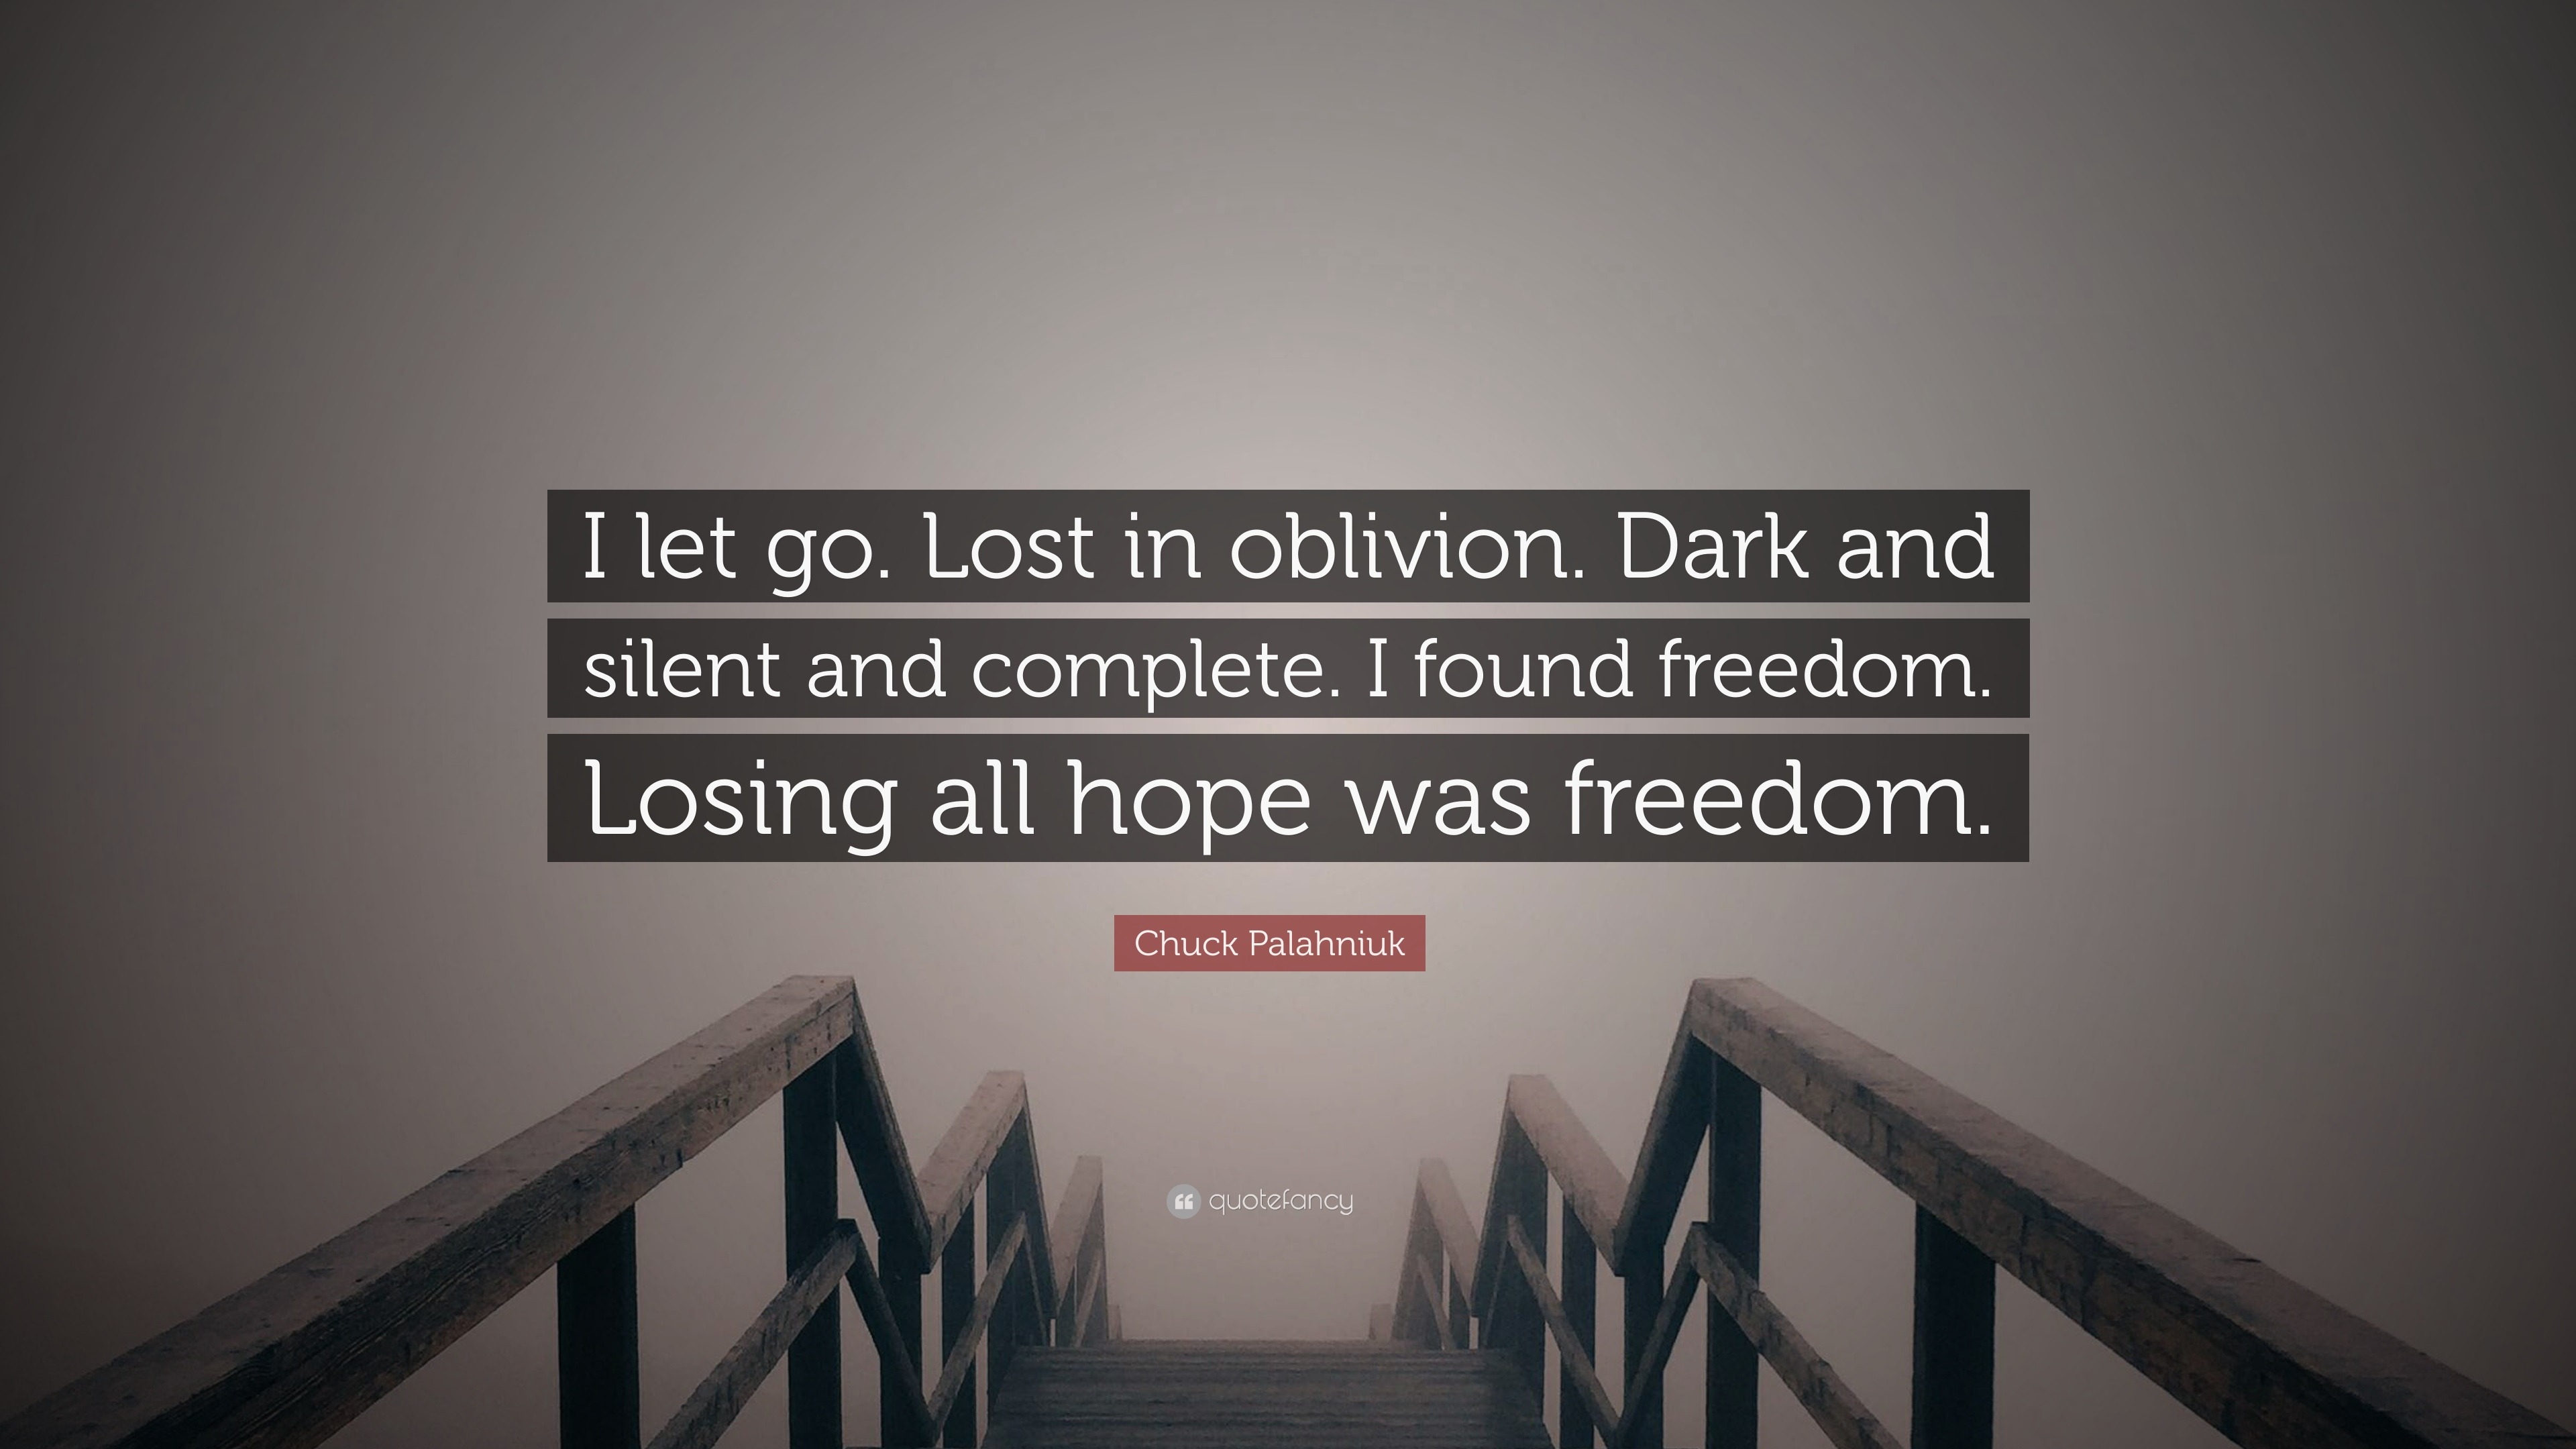 Chuck Palahniuk Quote: “I let go. Lost in oblivion. Dark and silent and  complete. I found